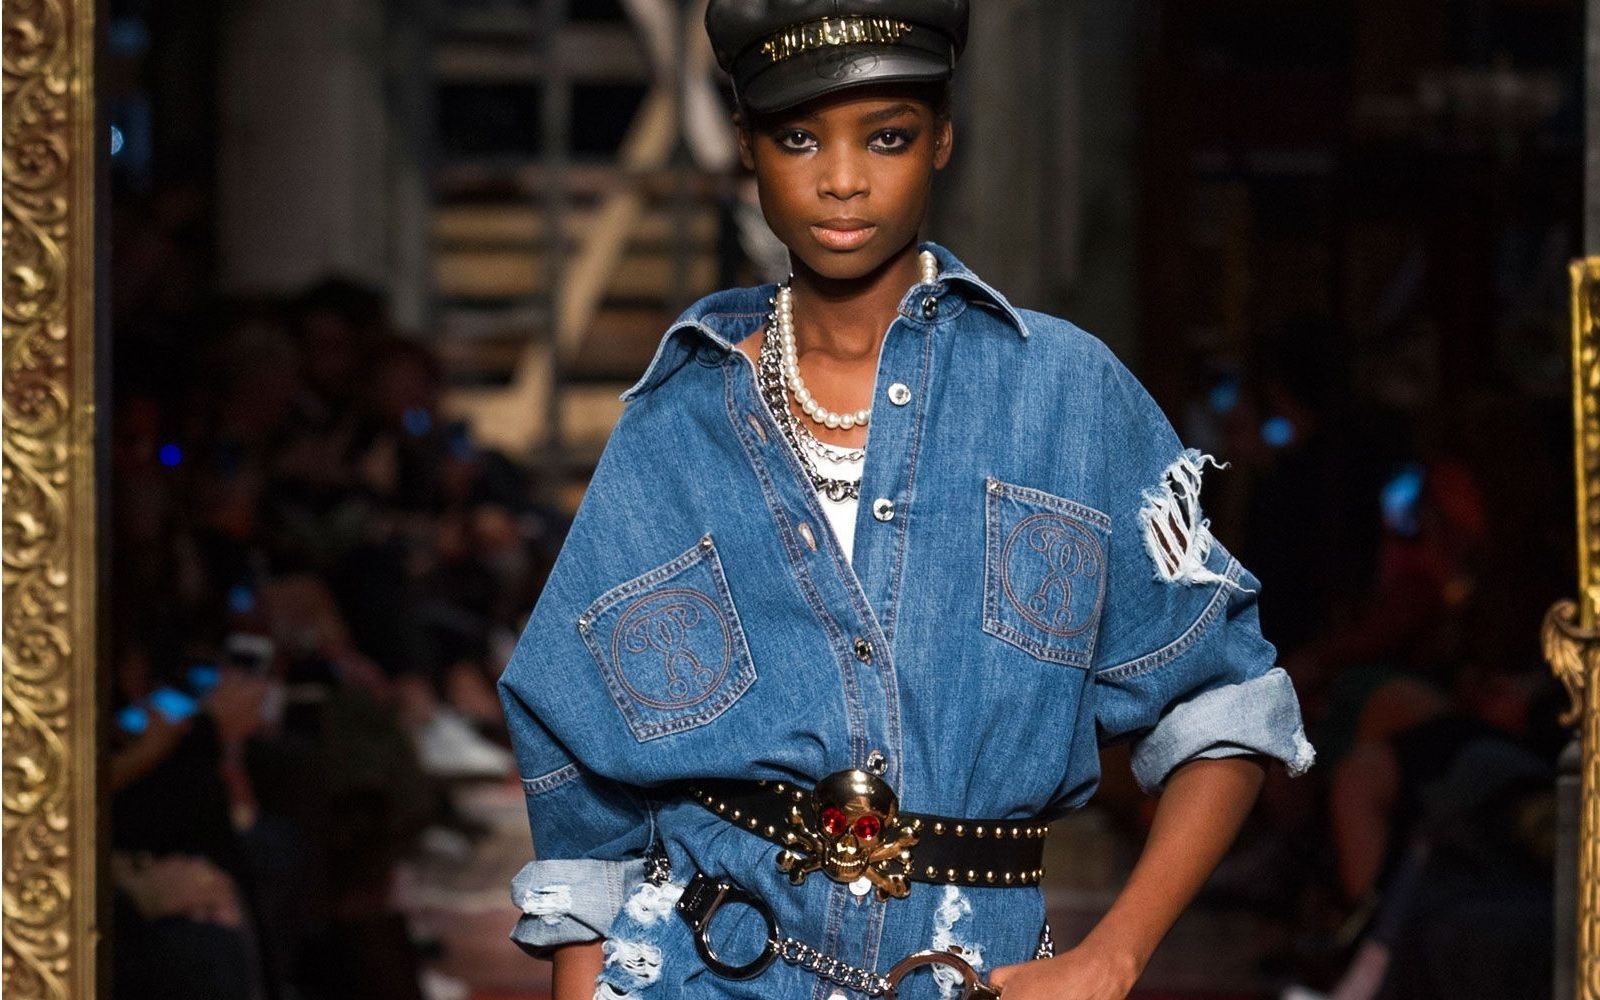 Moschino Launches New Denim Collection- M05CH1N0 JEANS collection